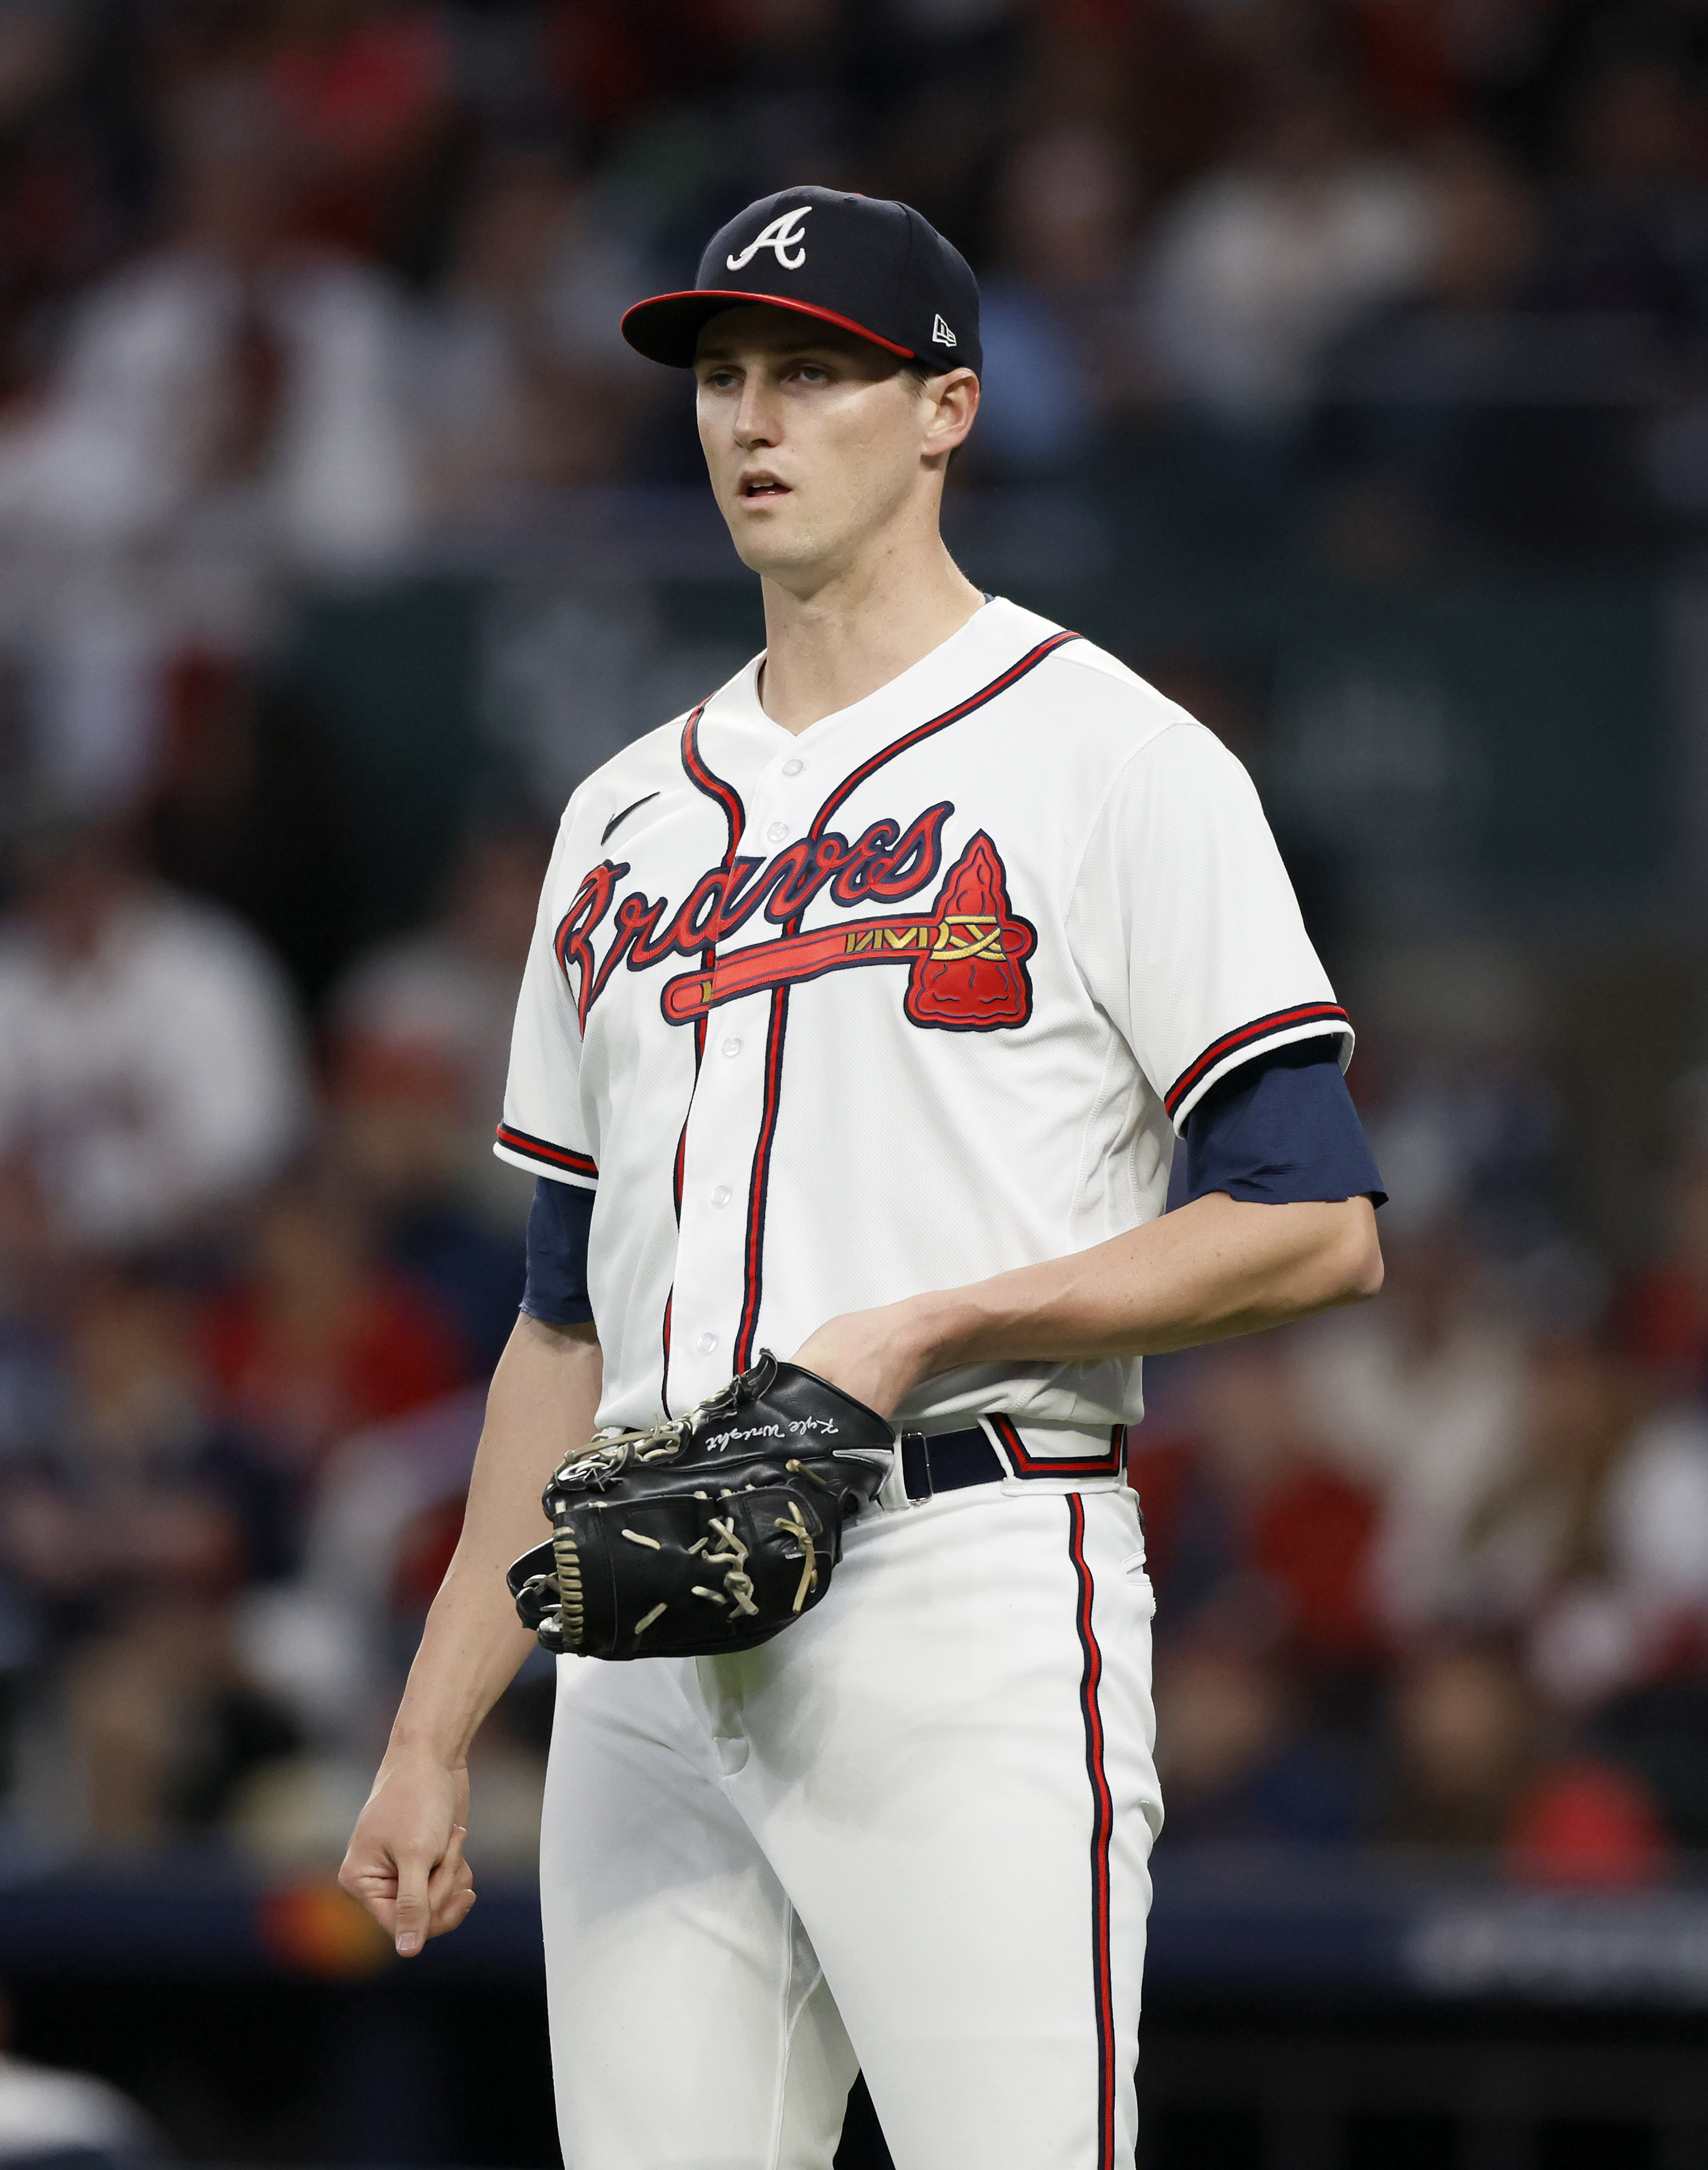 Kyle Wright (Team-Issued or Game-Used) 2019 Atlanta Braves Hank